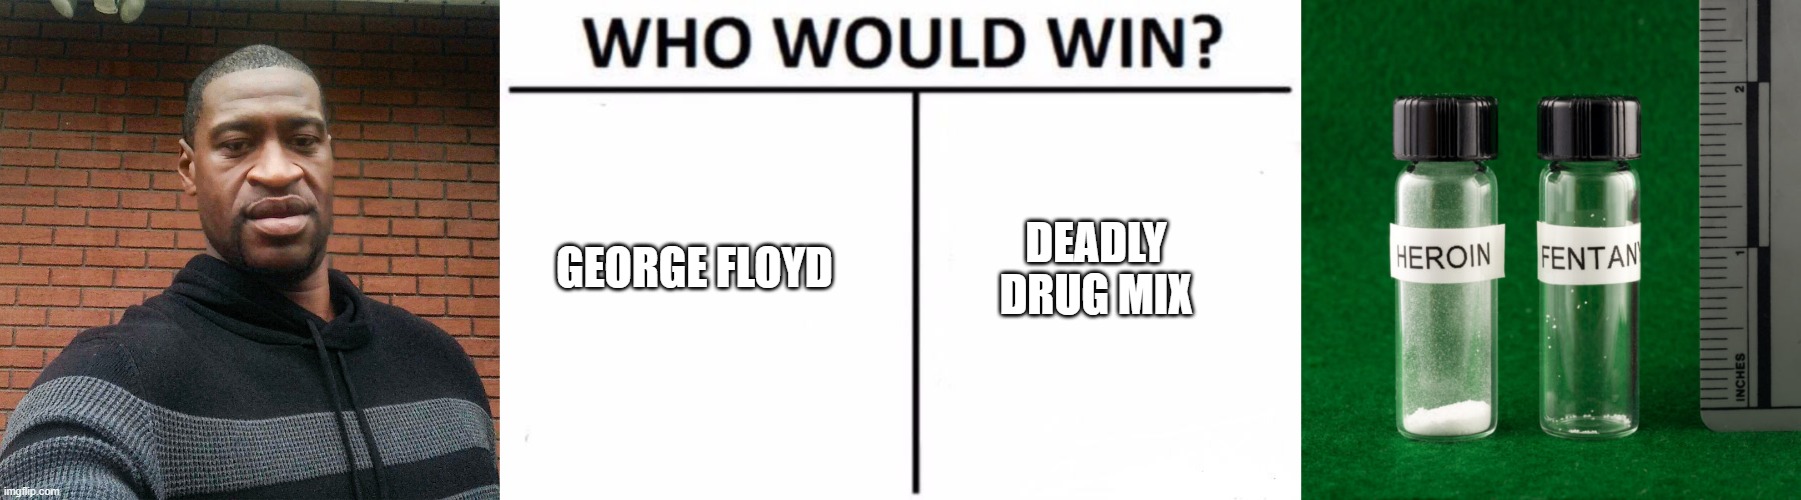 George Floyd's true murderer | DEADLY DRUG MIX; GEORGE FLOYD | image tagged in memes,who would win,blm,protest,drugs are bad,george floyd | made w/ Imgflip meme maker